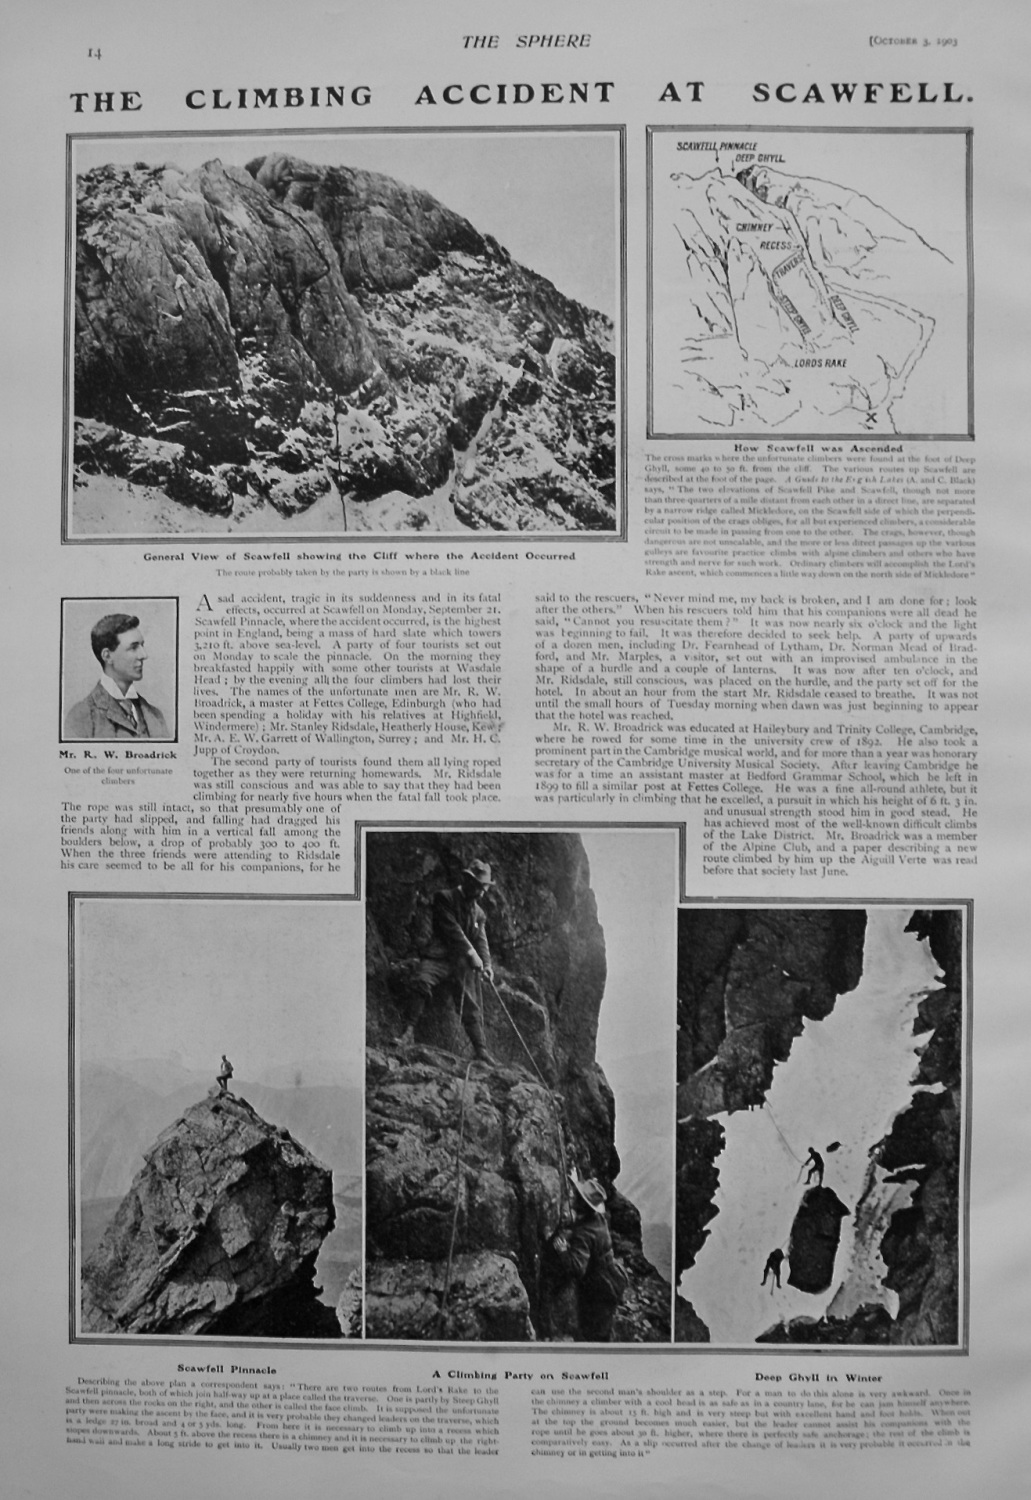 The Climbing Accident at Scawfell. 1903